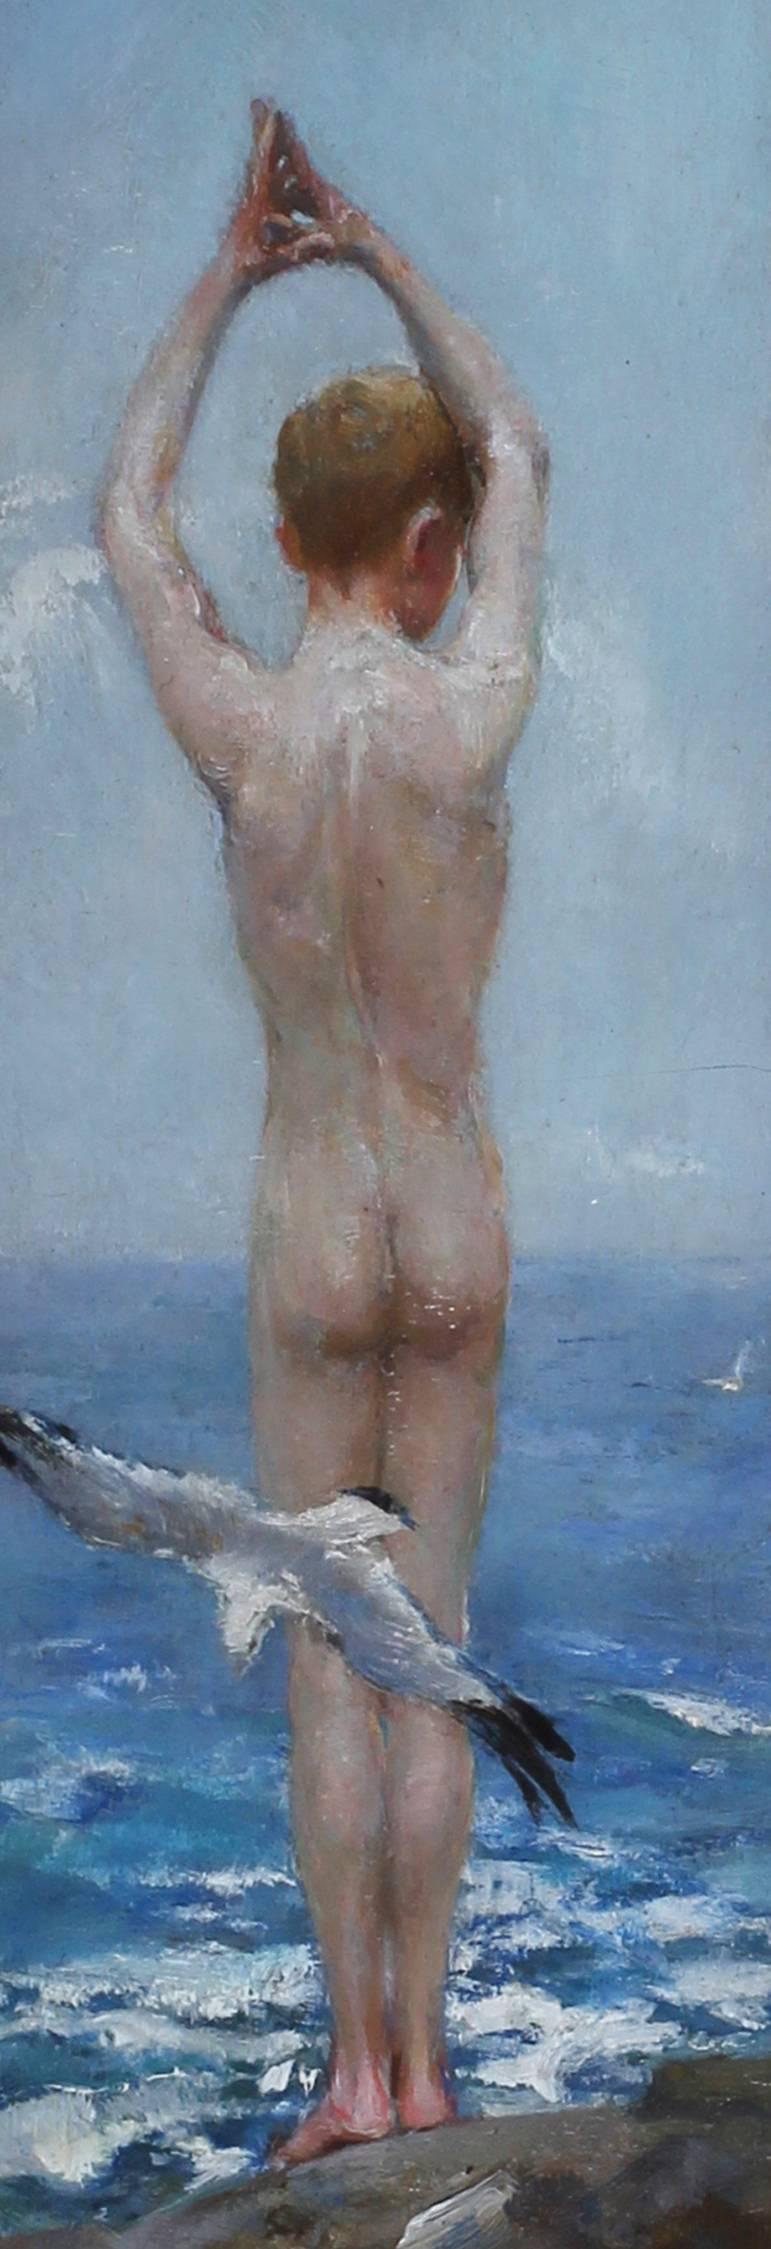 Joseph Thorburn-Ross, (British, 1849-1903)
'The Diver'
Oil on Canvas laid down on panel
16.5 x 4in. (including frame)
13 x 3.1/8in. (excluding frame)
Signed 'J. Thorburn-Ross' (lower middle)

Exhibition details: National exhibition, Edinburgh, 1908.